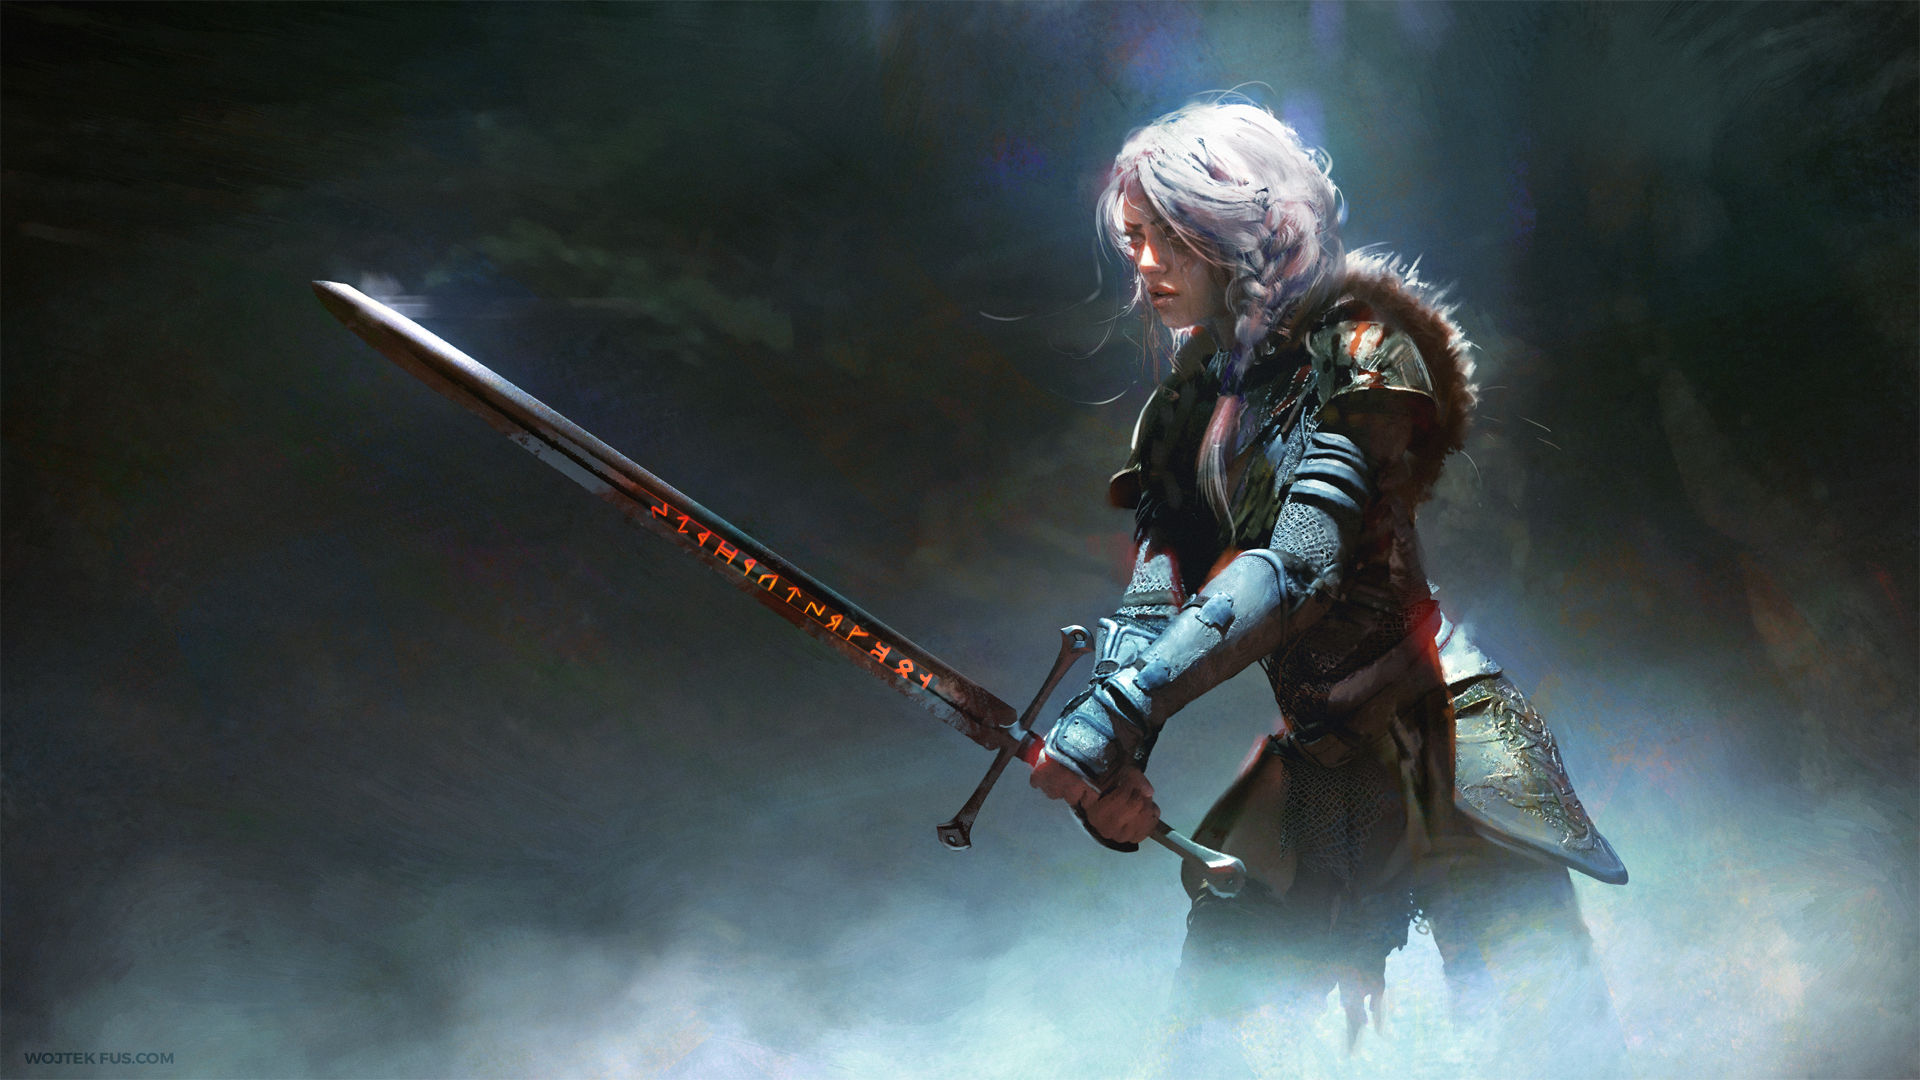 The Witcher Background Download free